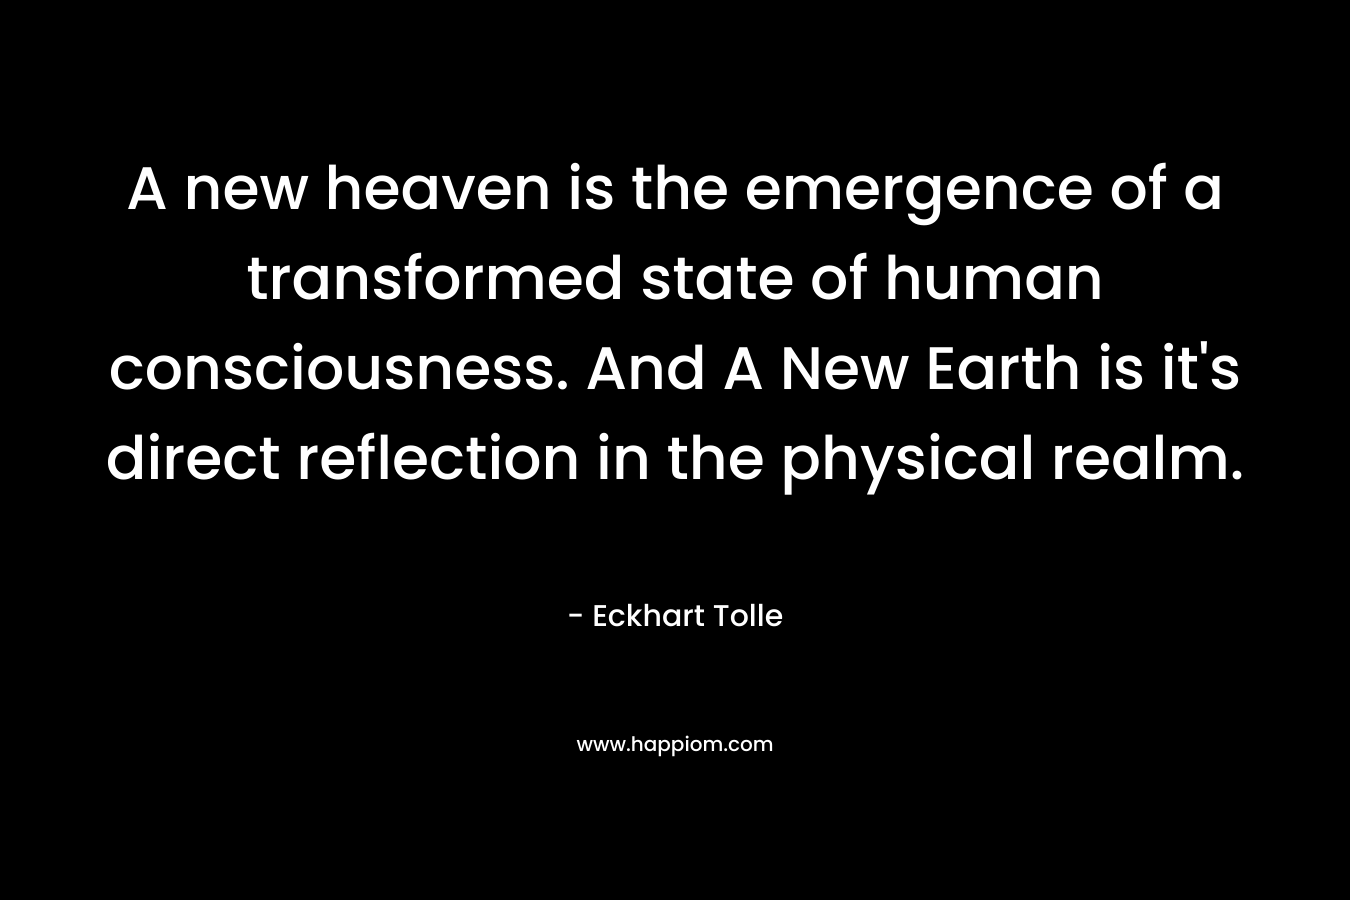 A new heaven is the emergence of a transformed state of human consciousness. And A New Earth is it’s direct reflection in the physical realm. – Eckhart Tolle